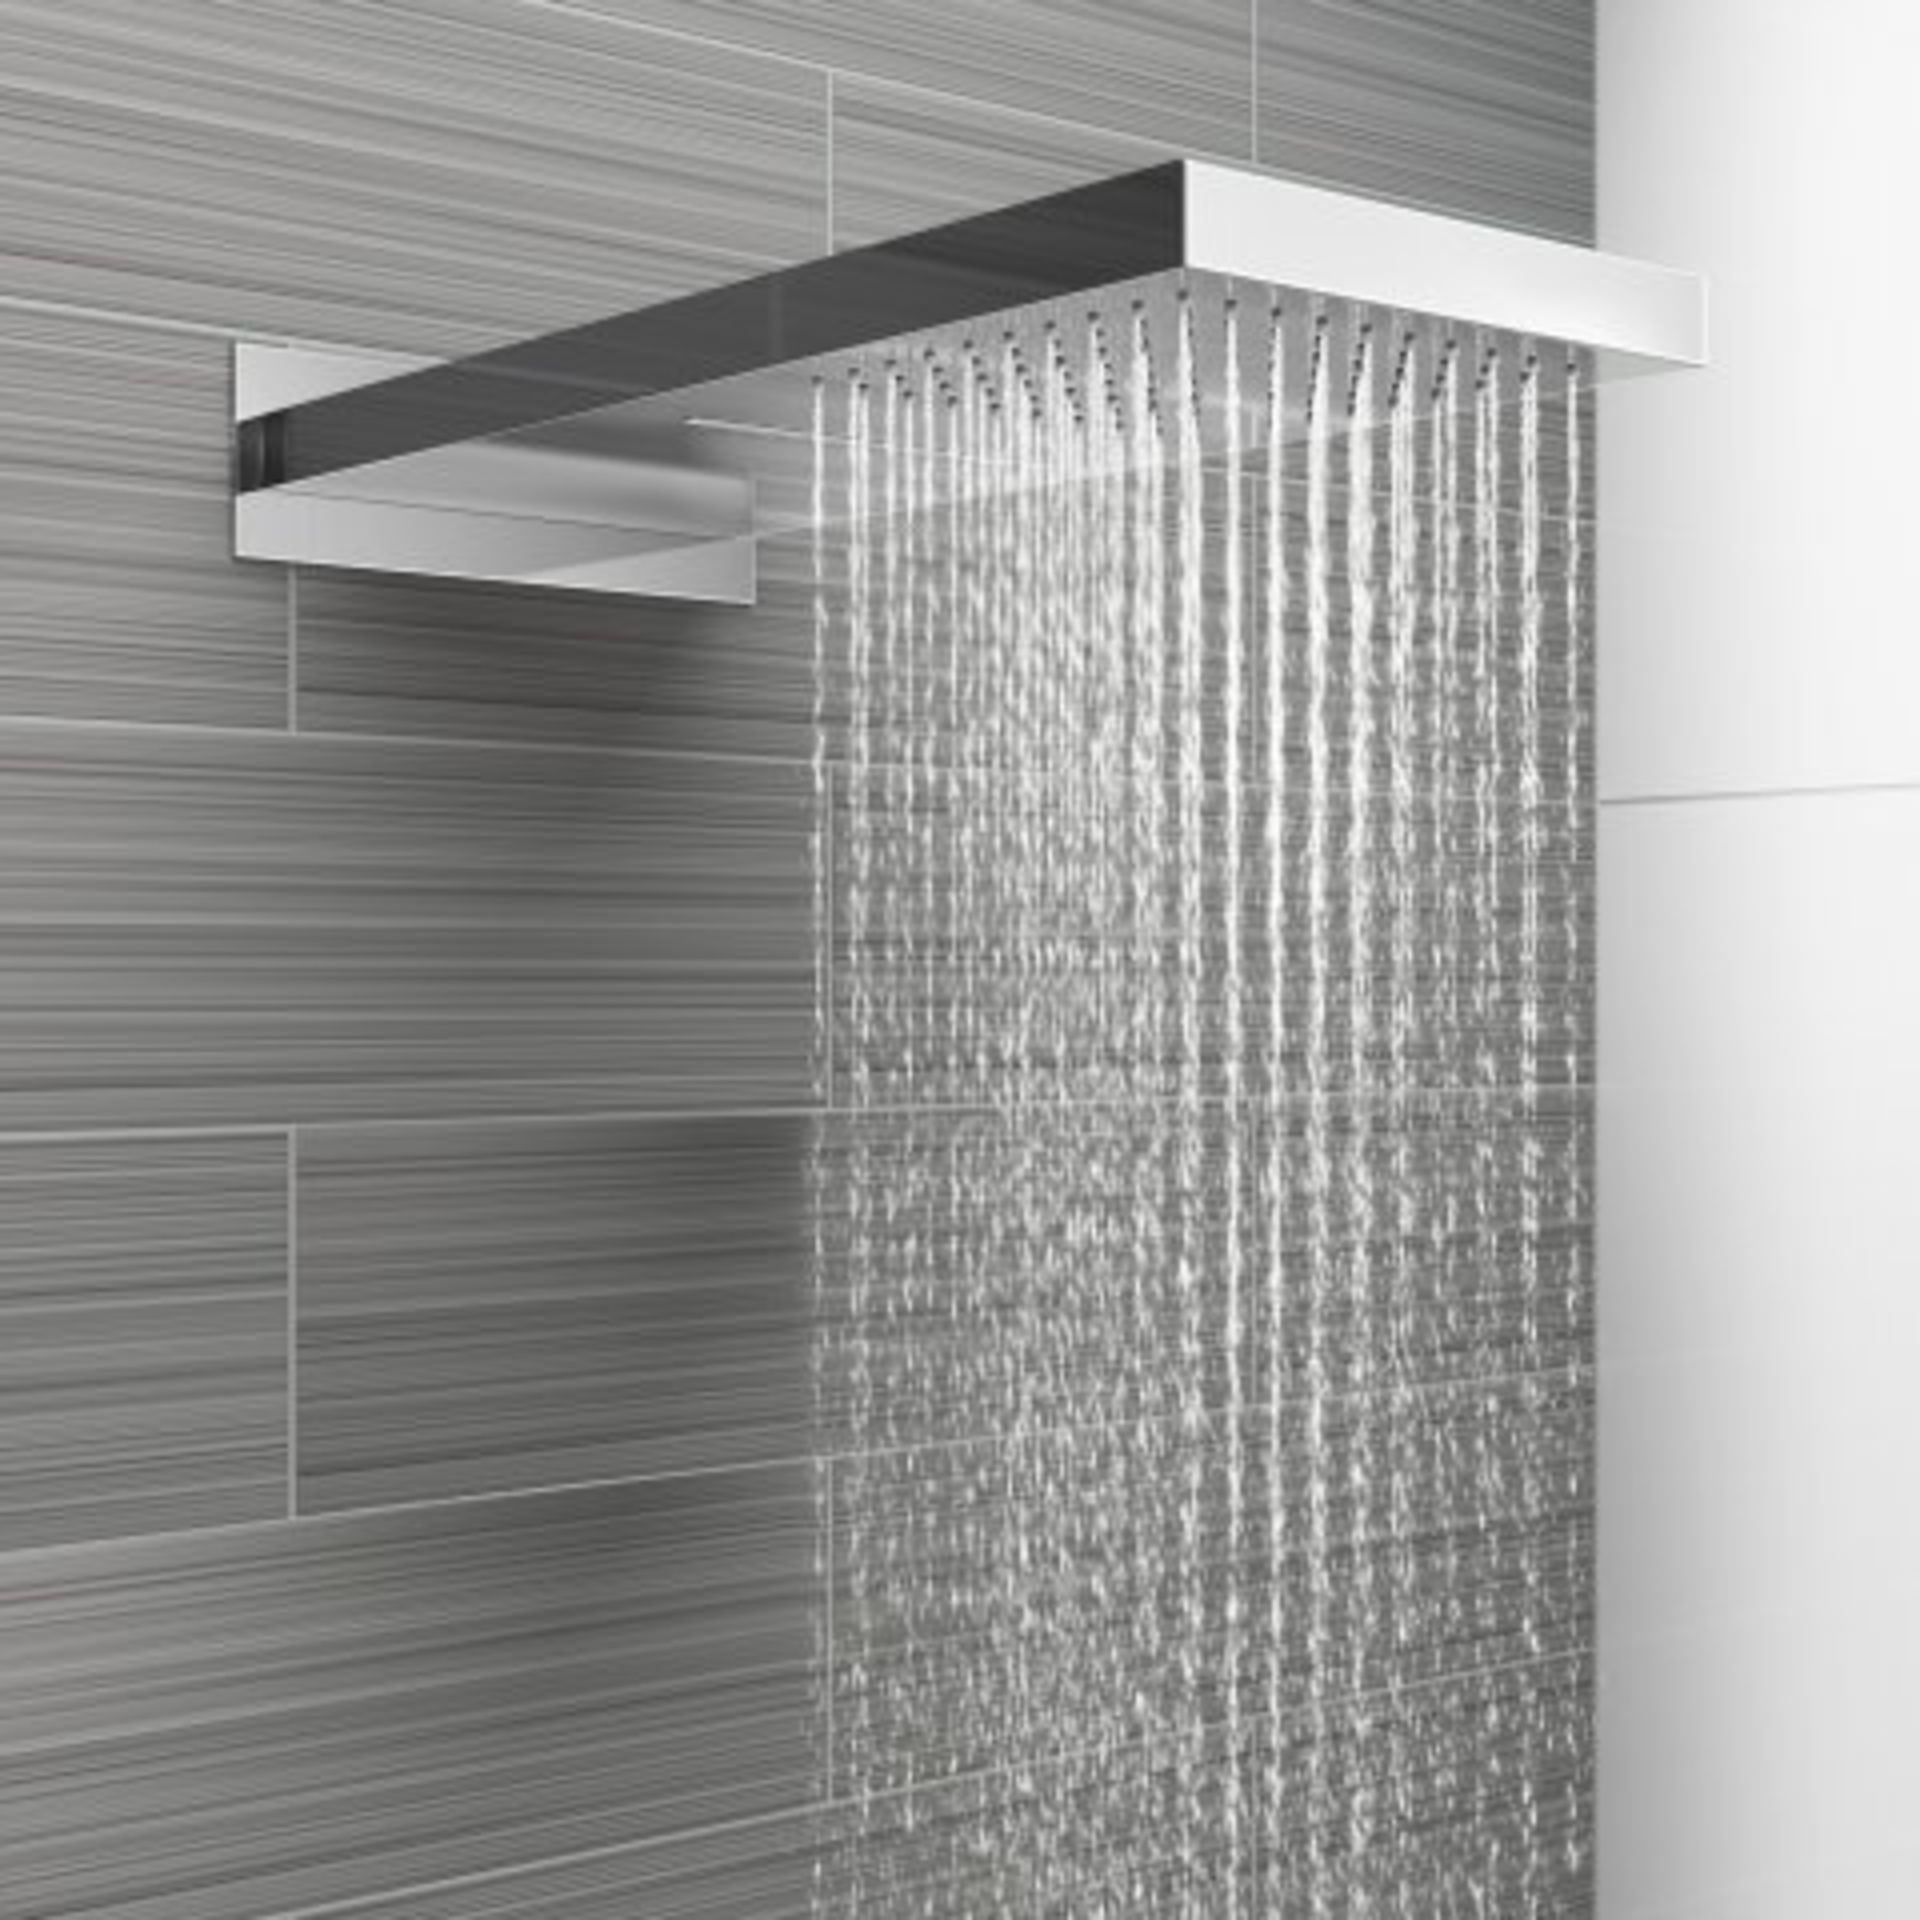 (I49) Stainless Steel 200x500mm Waterfall Shower Head RRP £374.99 "What An Experience": Enjoy - Image 3 of 5